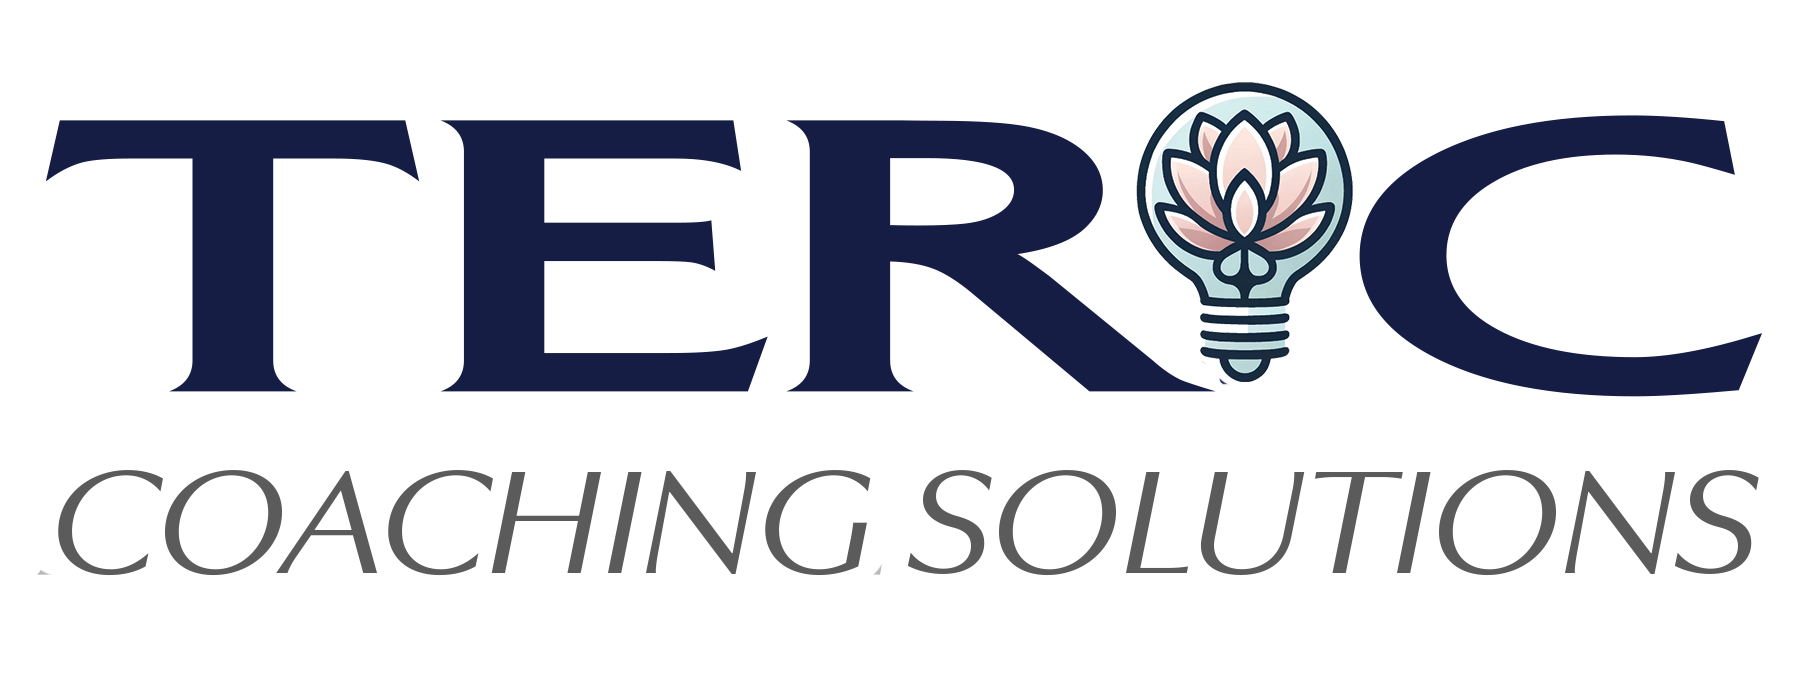 teric-coaching-solutions